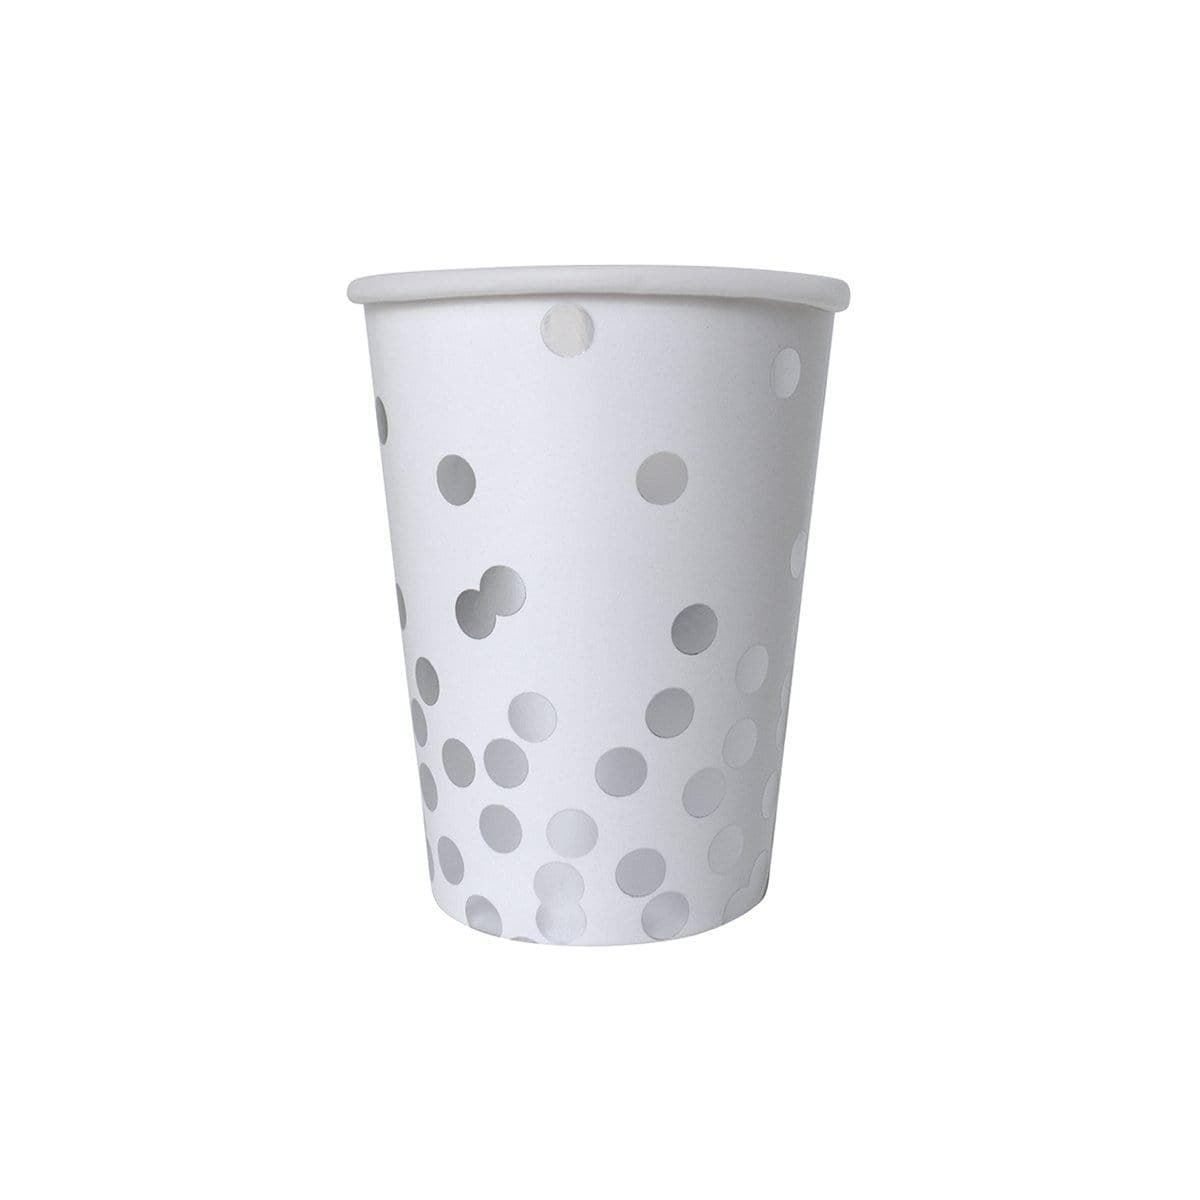 Buy Everyday Entertaining Confetti Cups 9 Oz. 8/Pkg - Silver sold at Party Expert